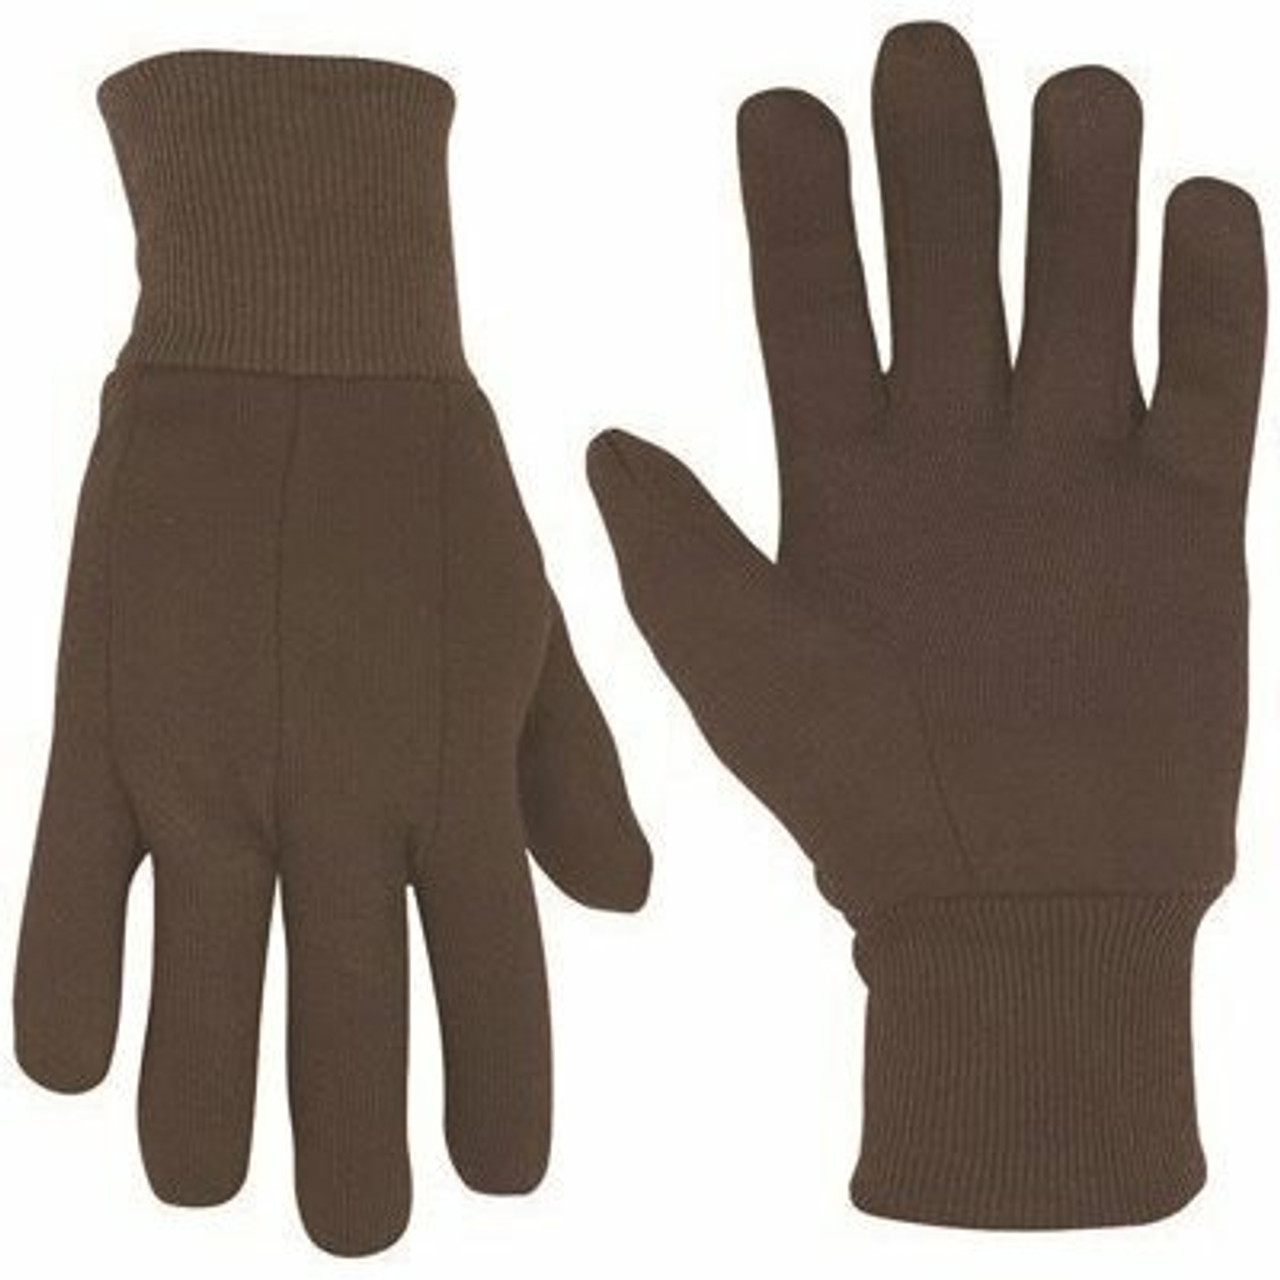 Custom Leathercraft Large Brown Jersey Glove (6-Pairs Per Pack)